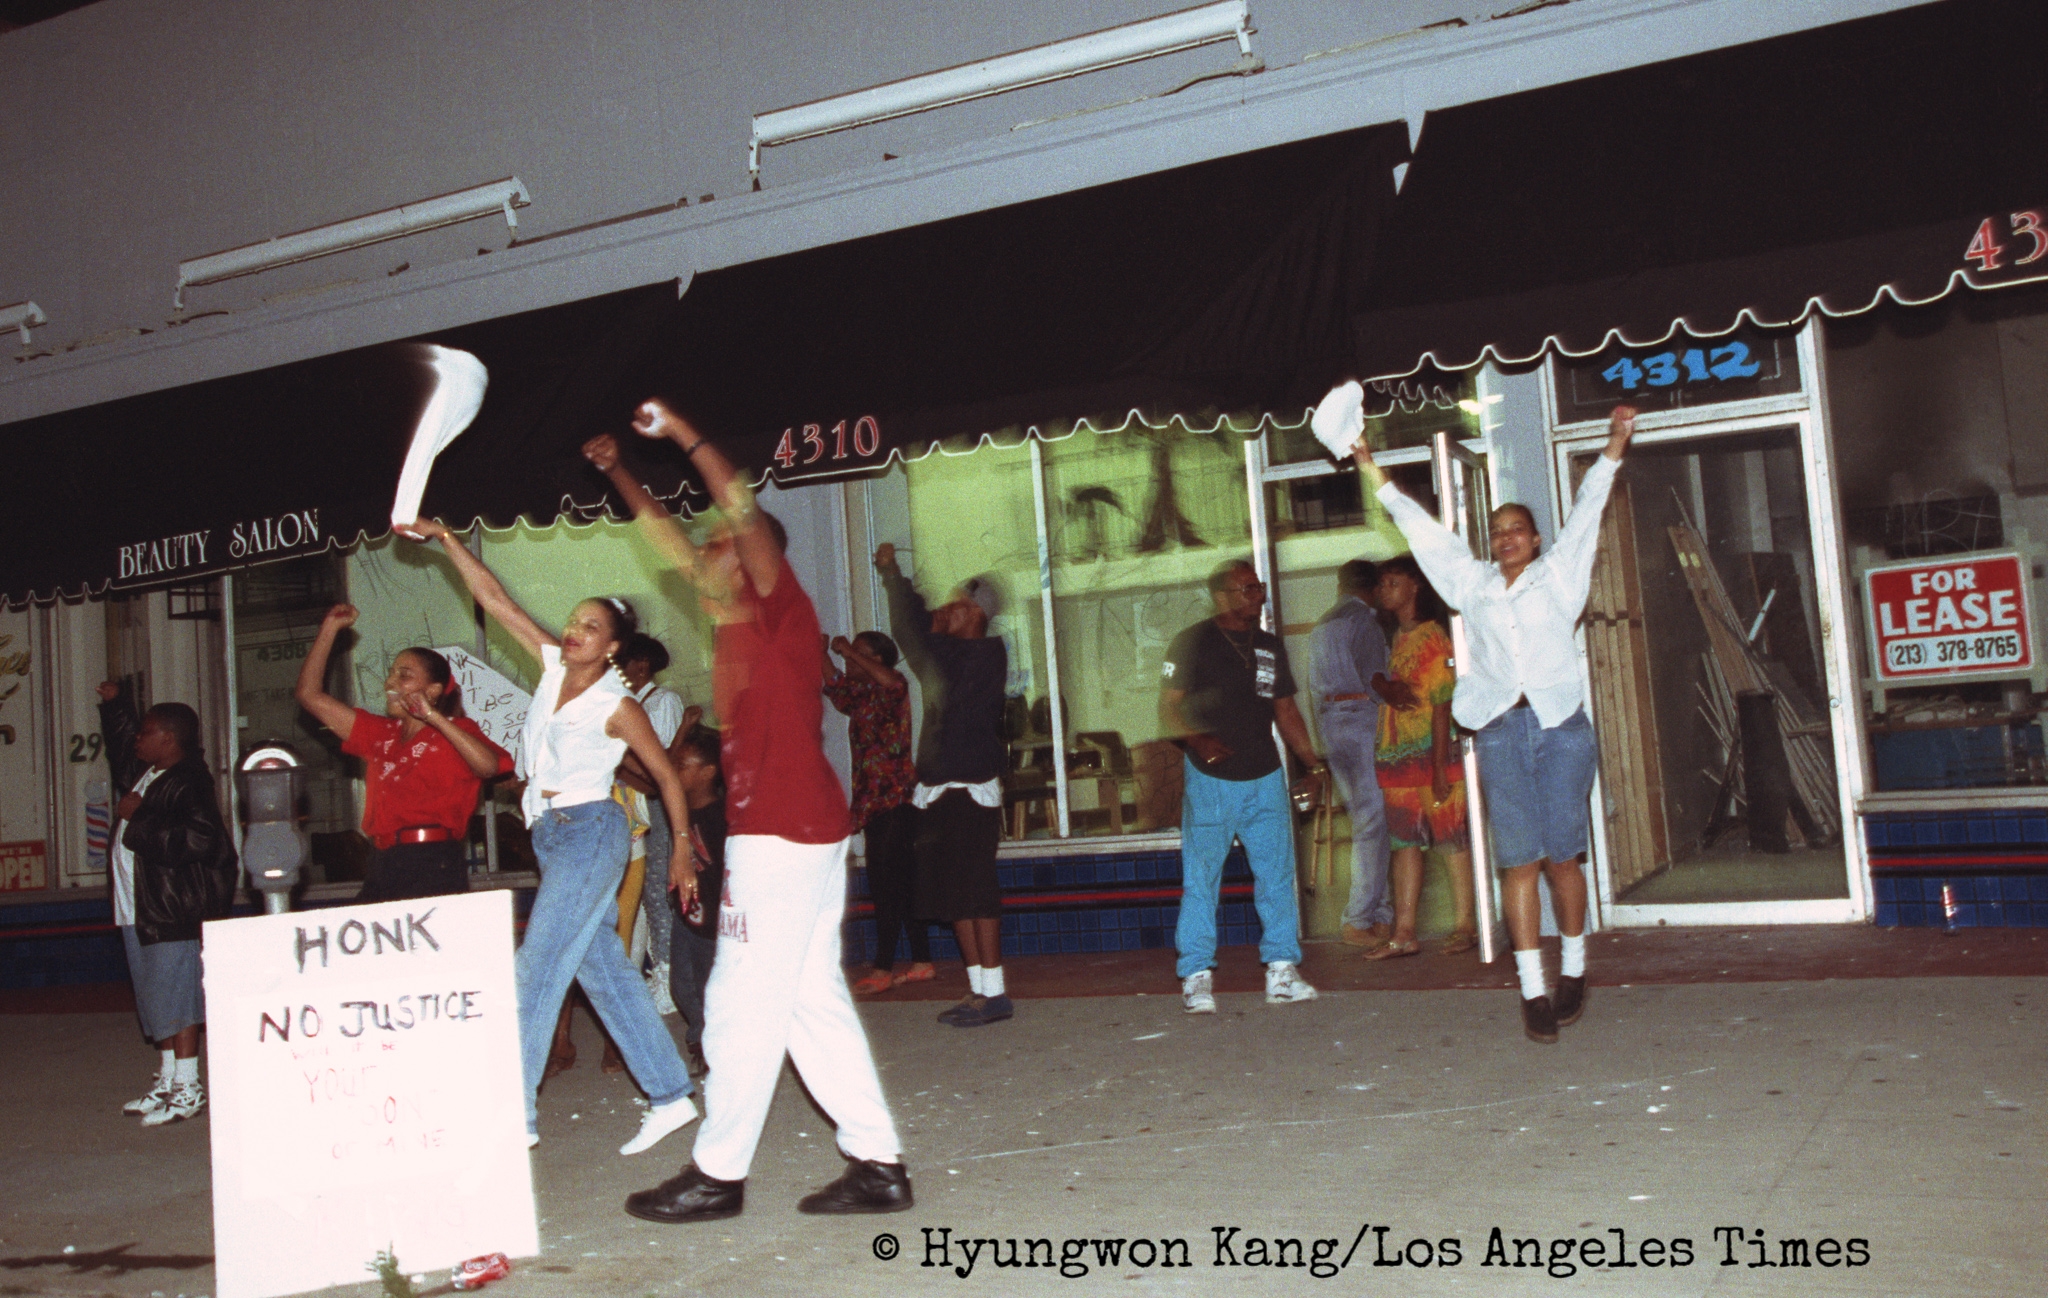 Protest in South Central